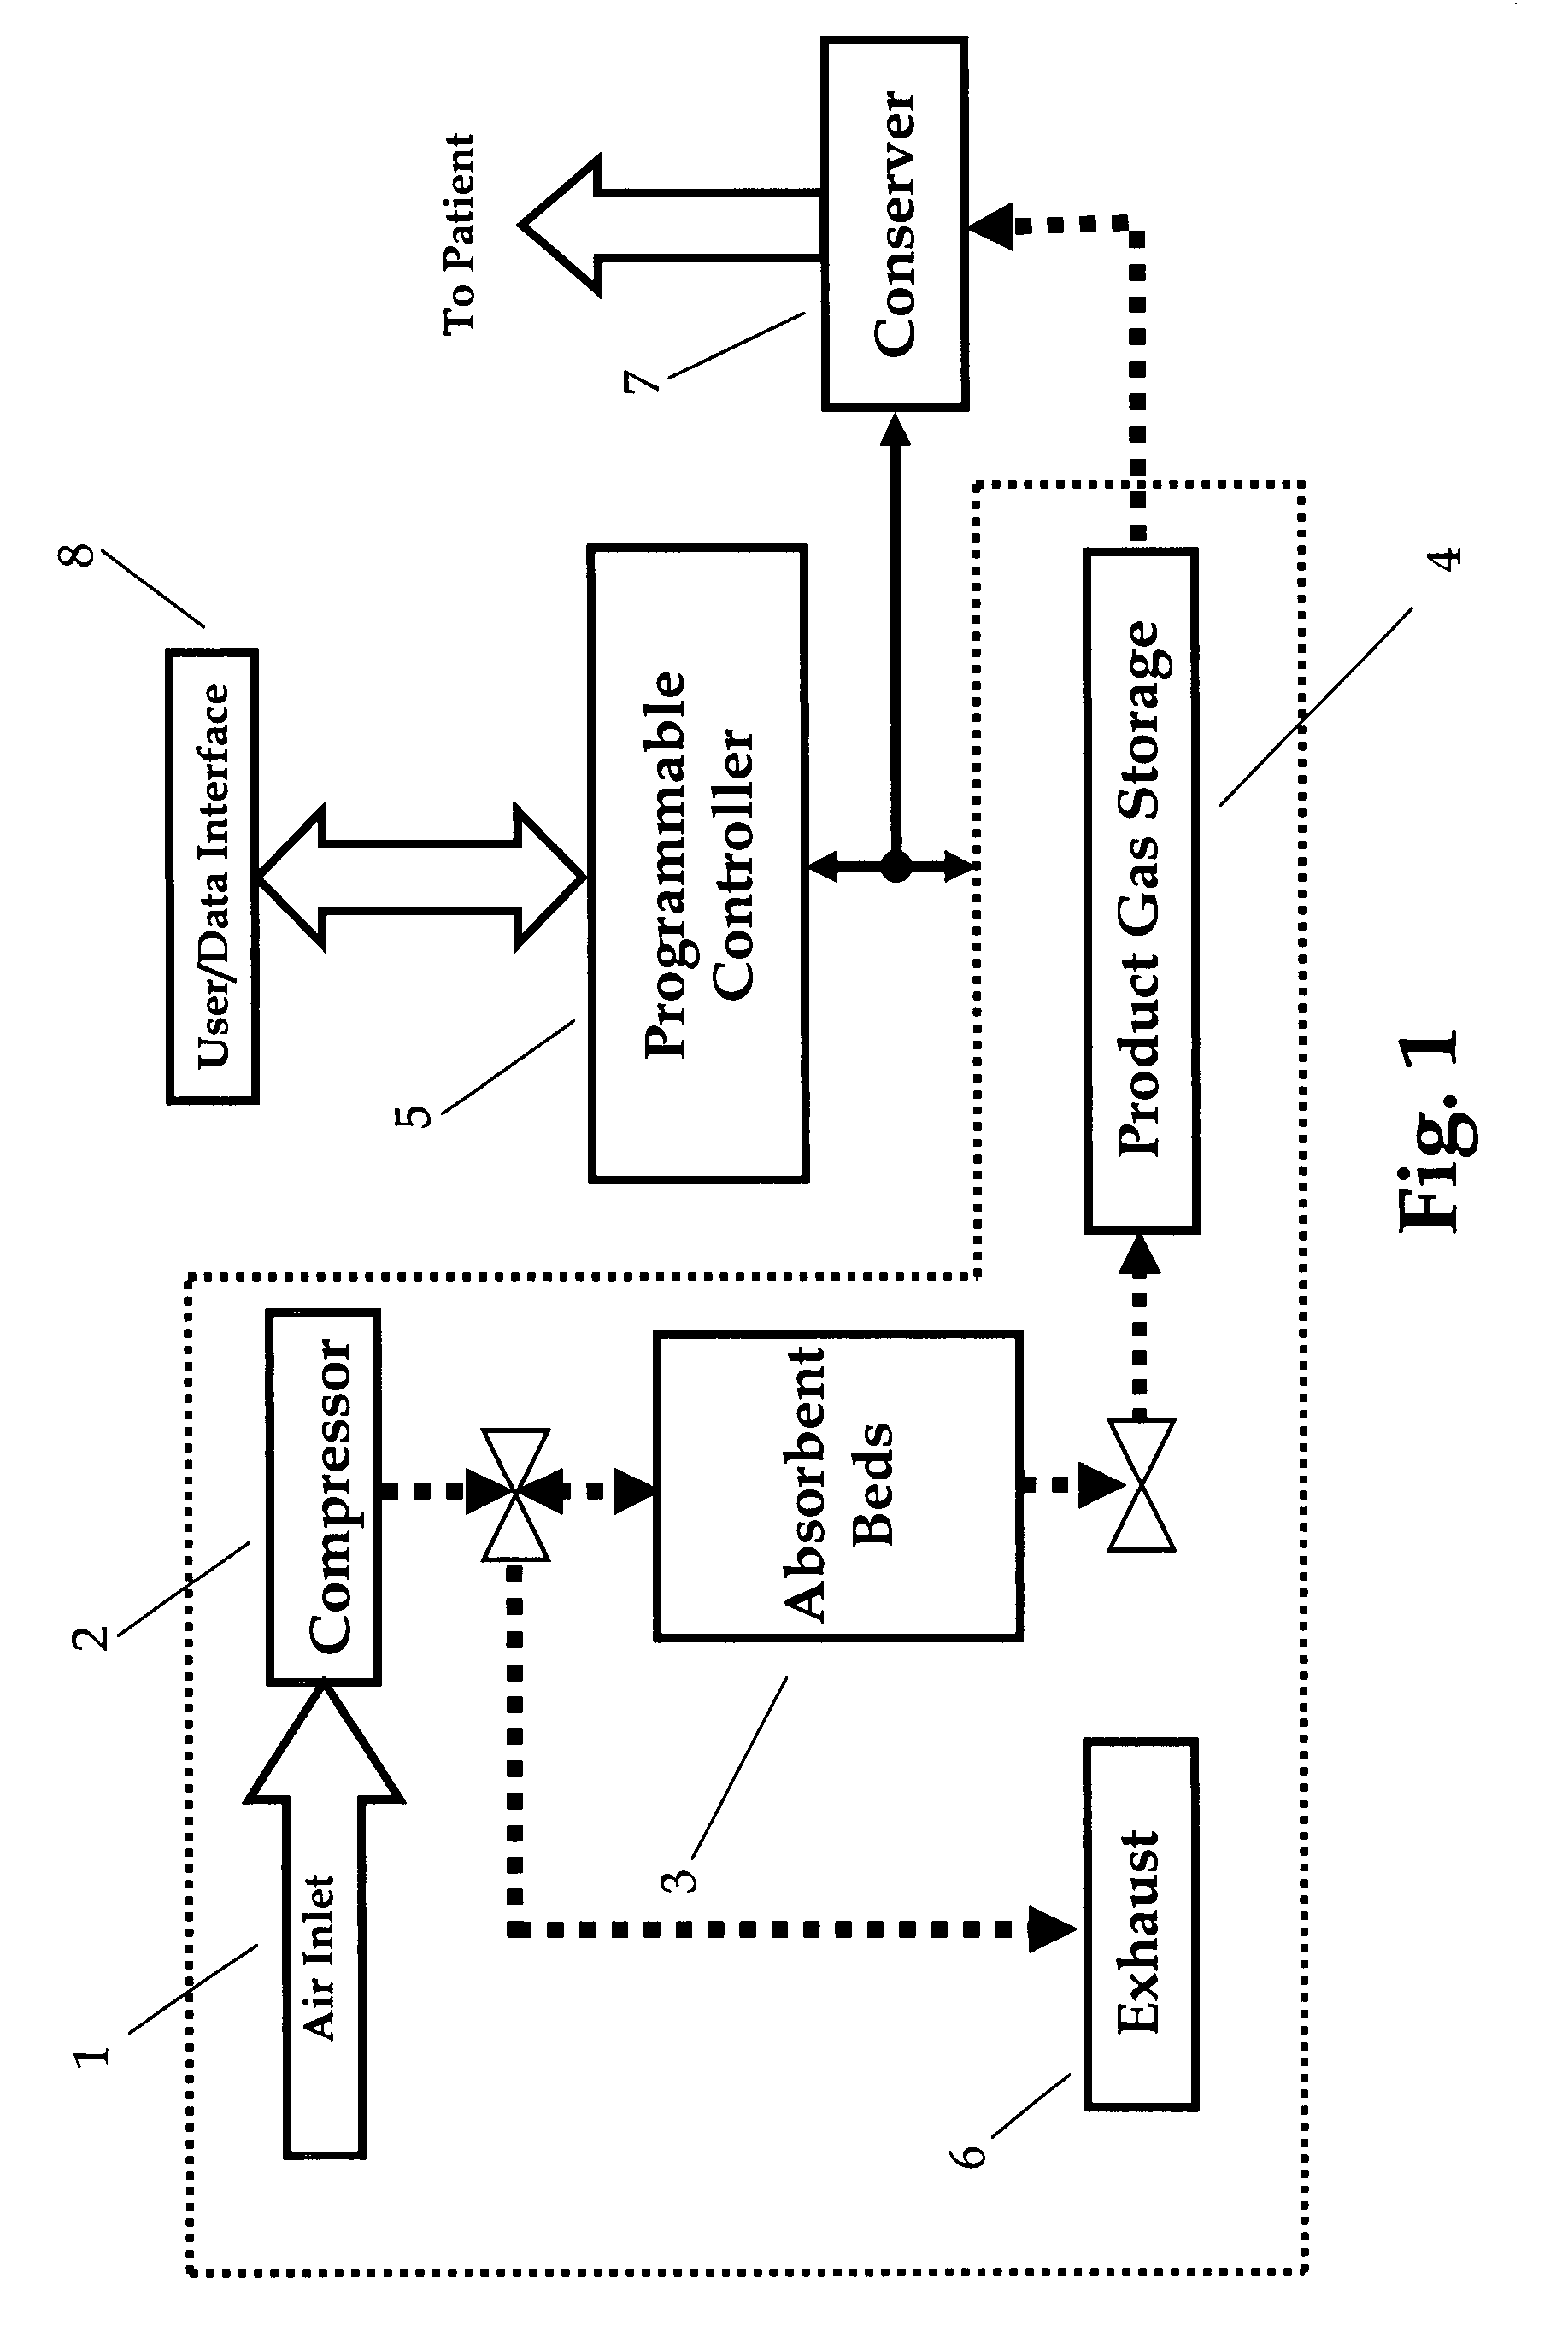 Adsorbent bed pressure balancing for a gas concentrator